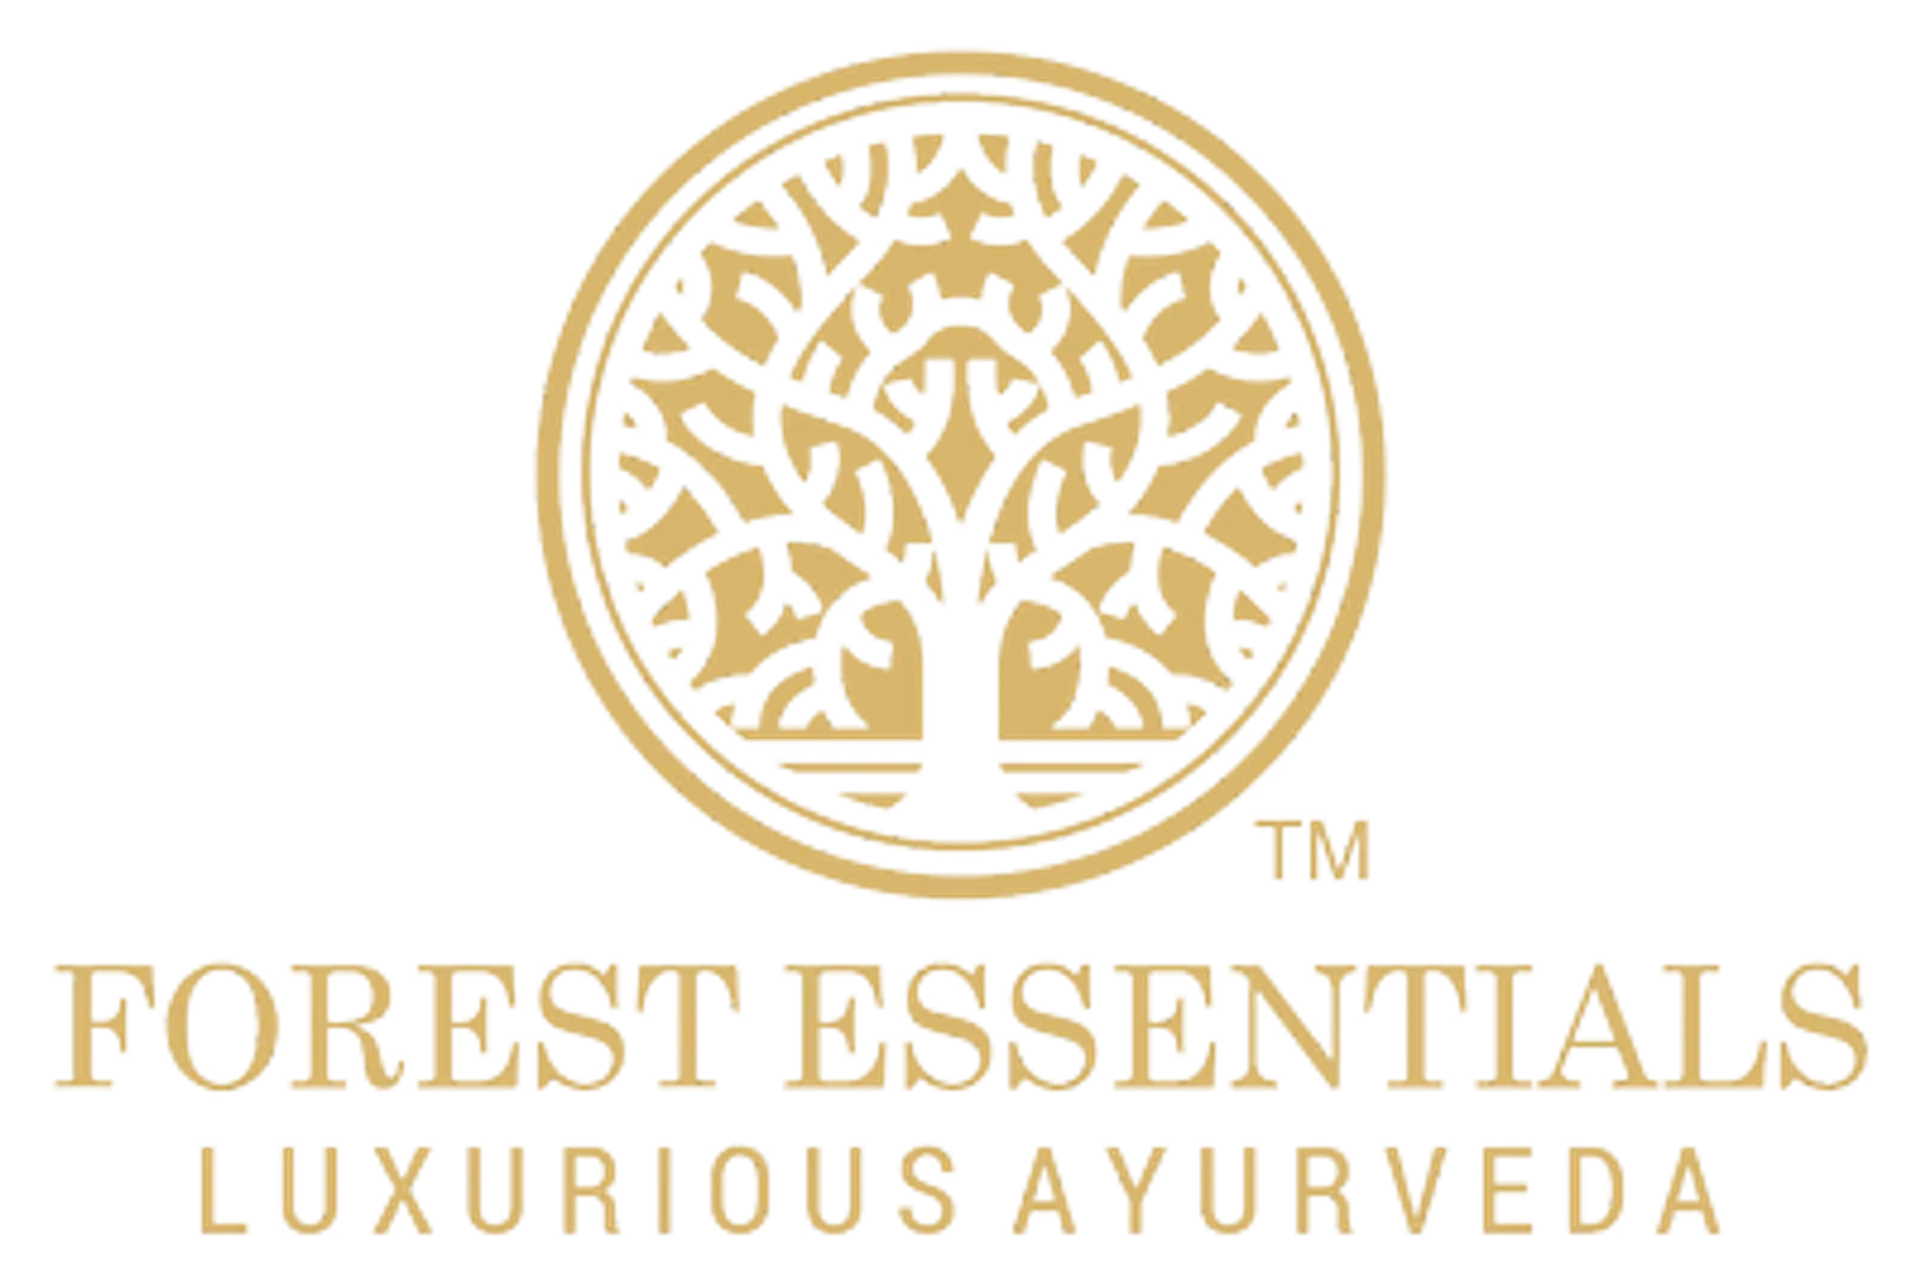 FOREST ESSENTIALS logo. Current weekly ad